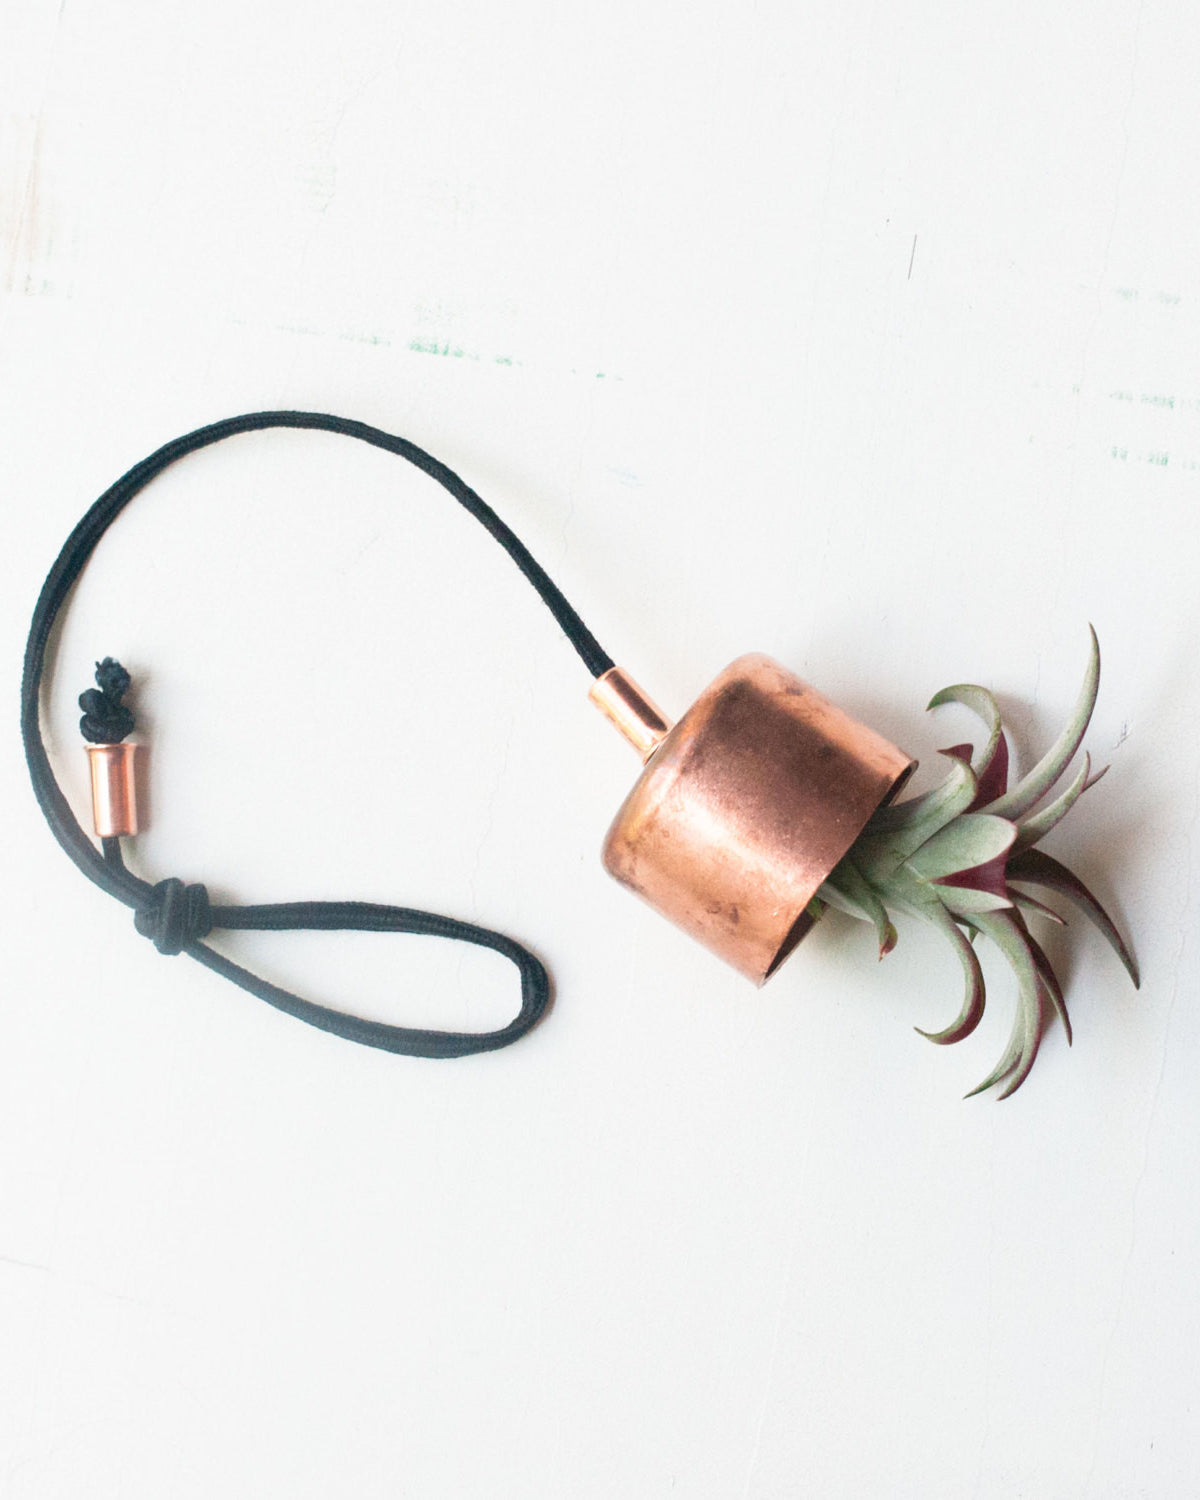 Hanging Planter Copper Chime with Airplant - Gather Goods Co - Raleigh, NC